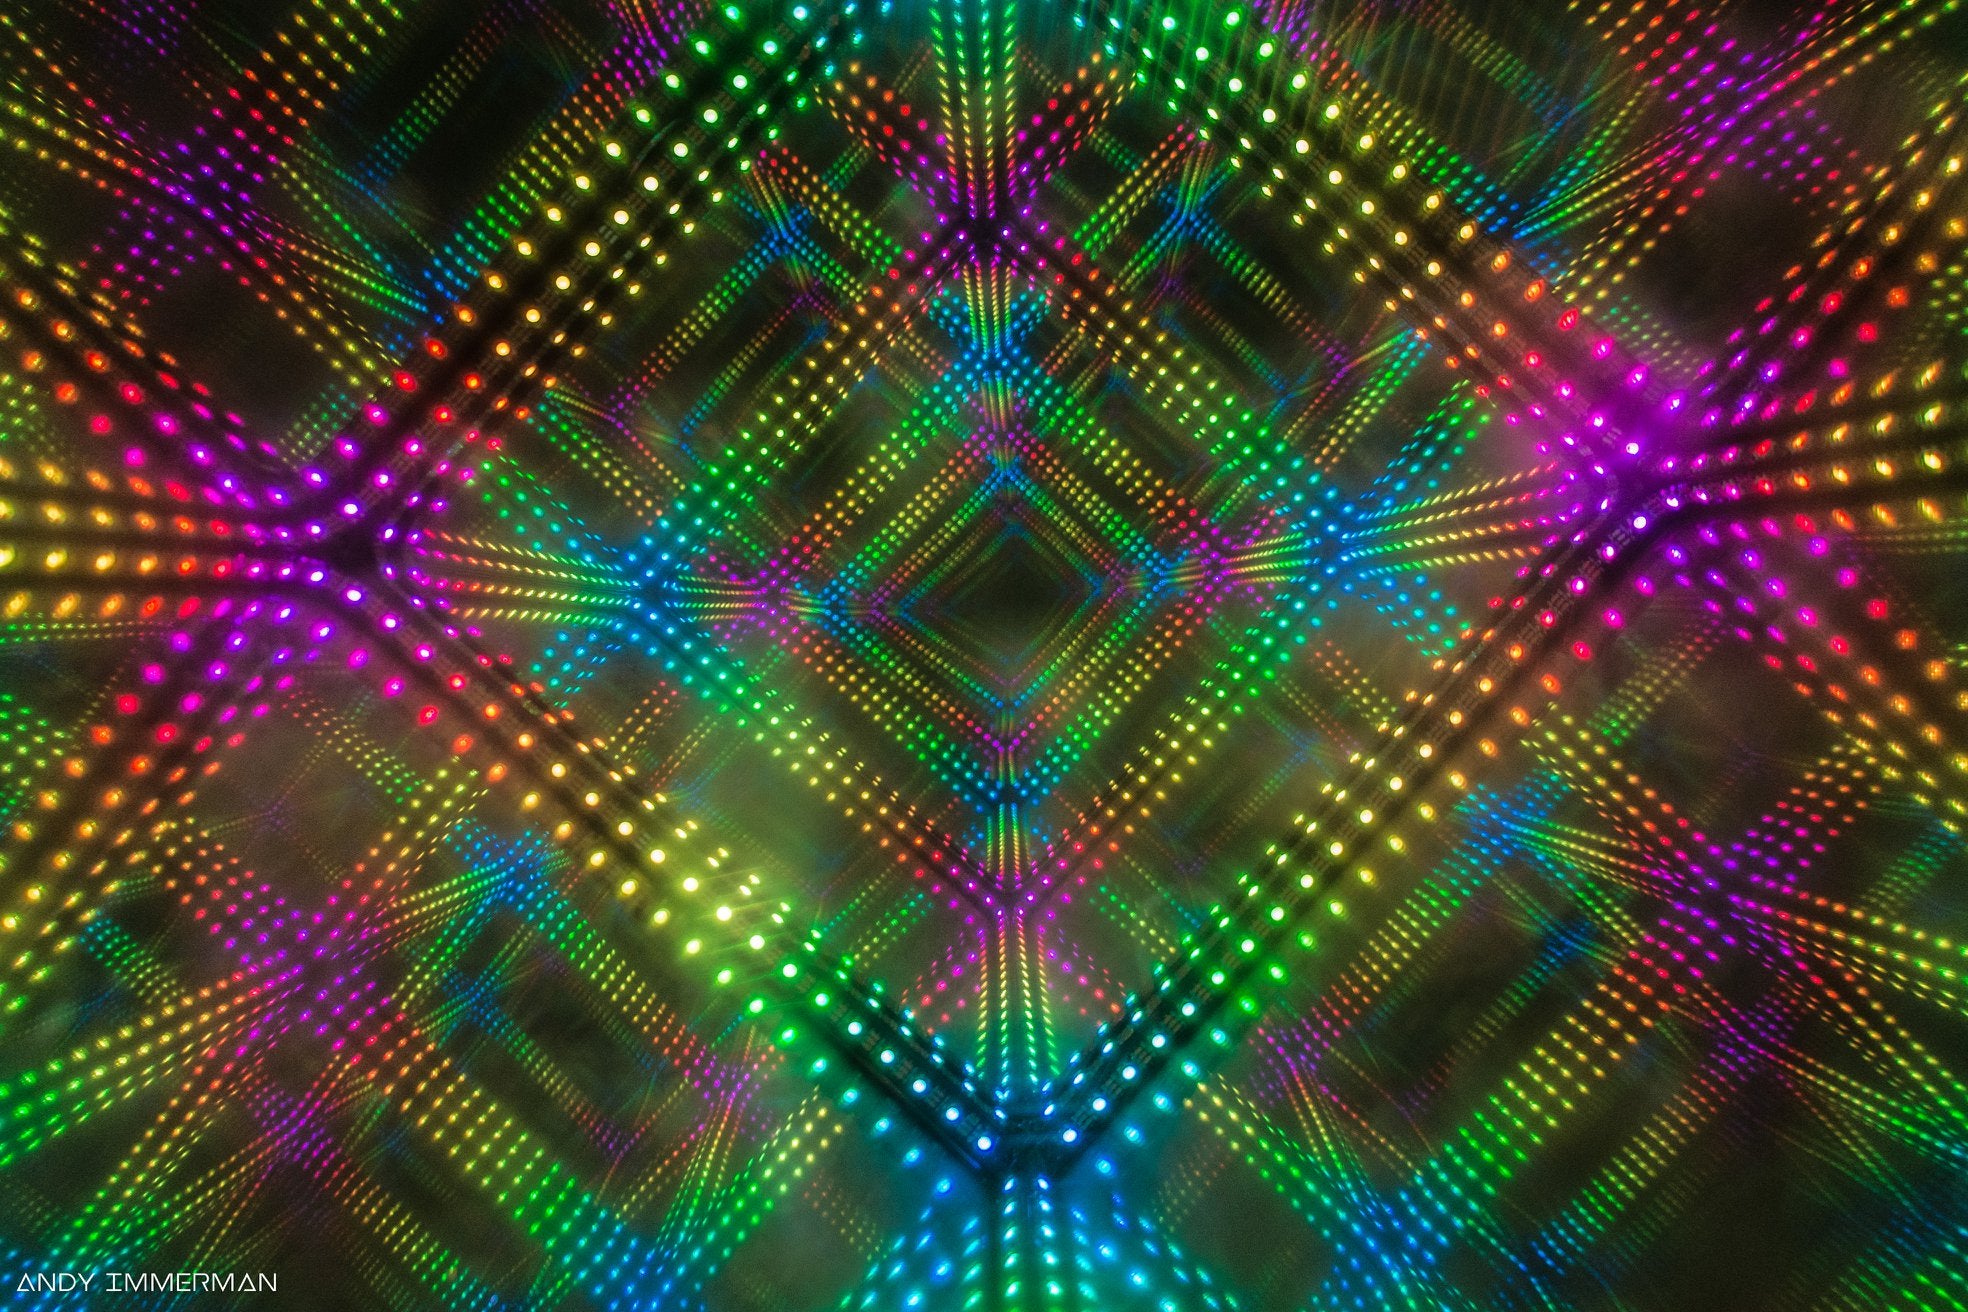 Kaleidoscope-like image of a clear cube with sound sensitive lighting around the edges